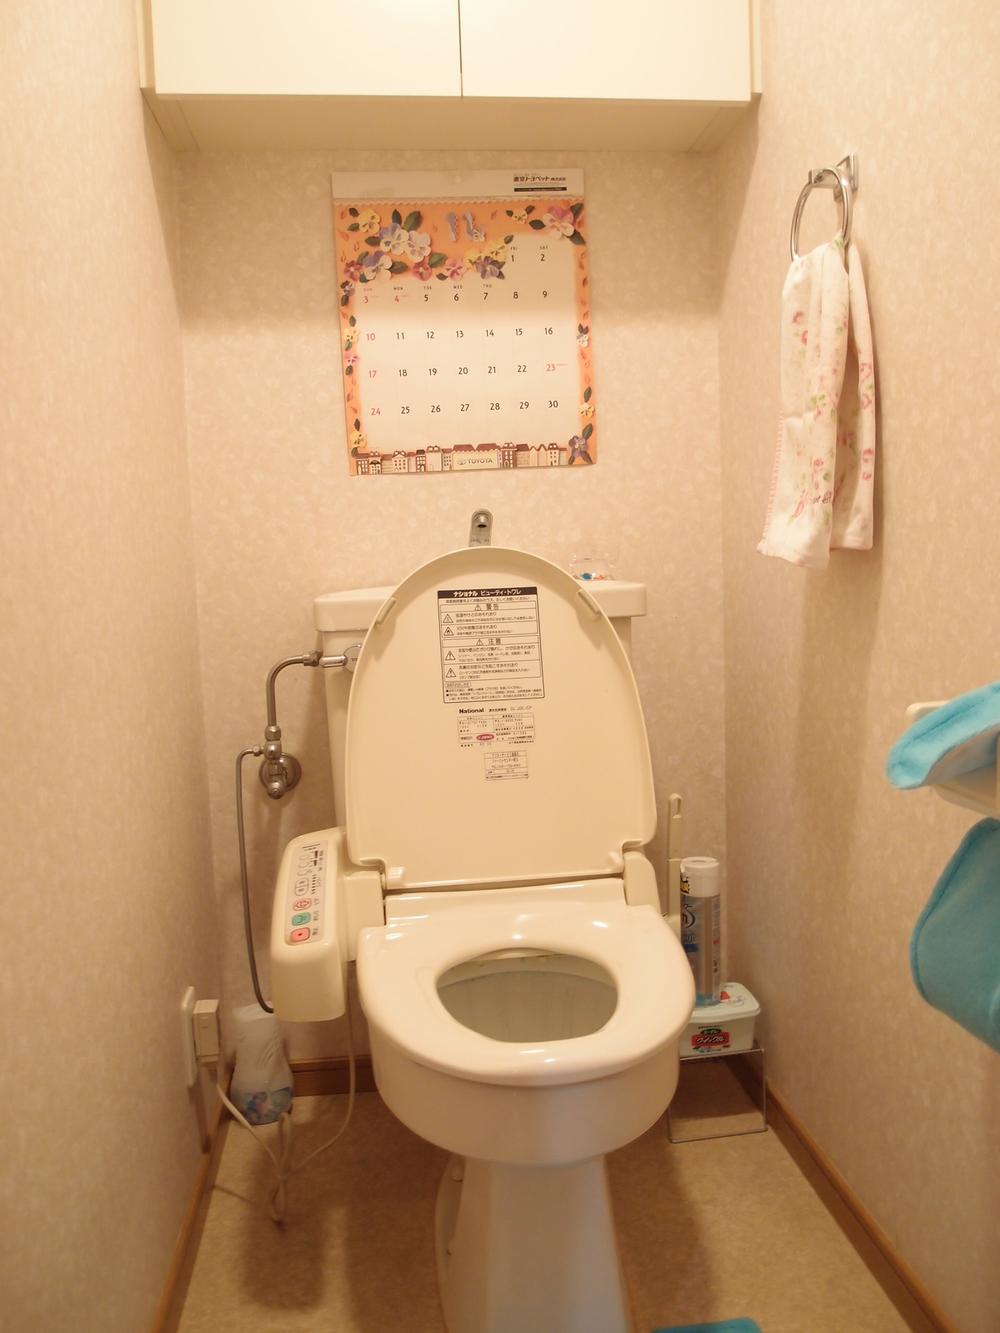 Toilet. Toilet (November 2013) Shooting  ※ Furniture and the like in the photo are not included in the sale